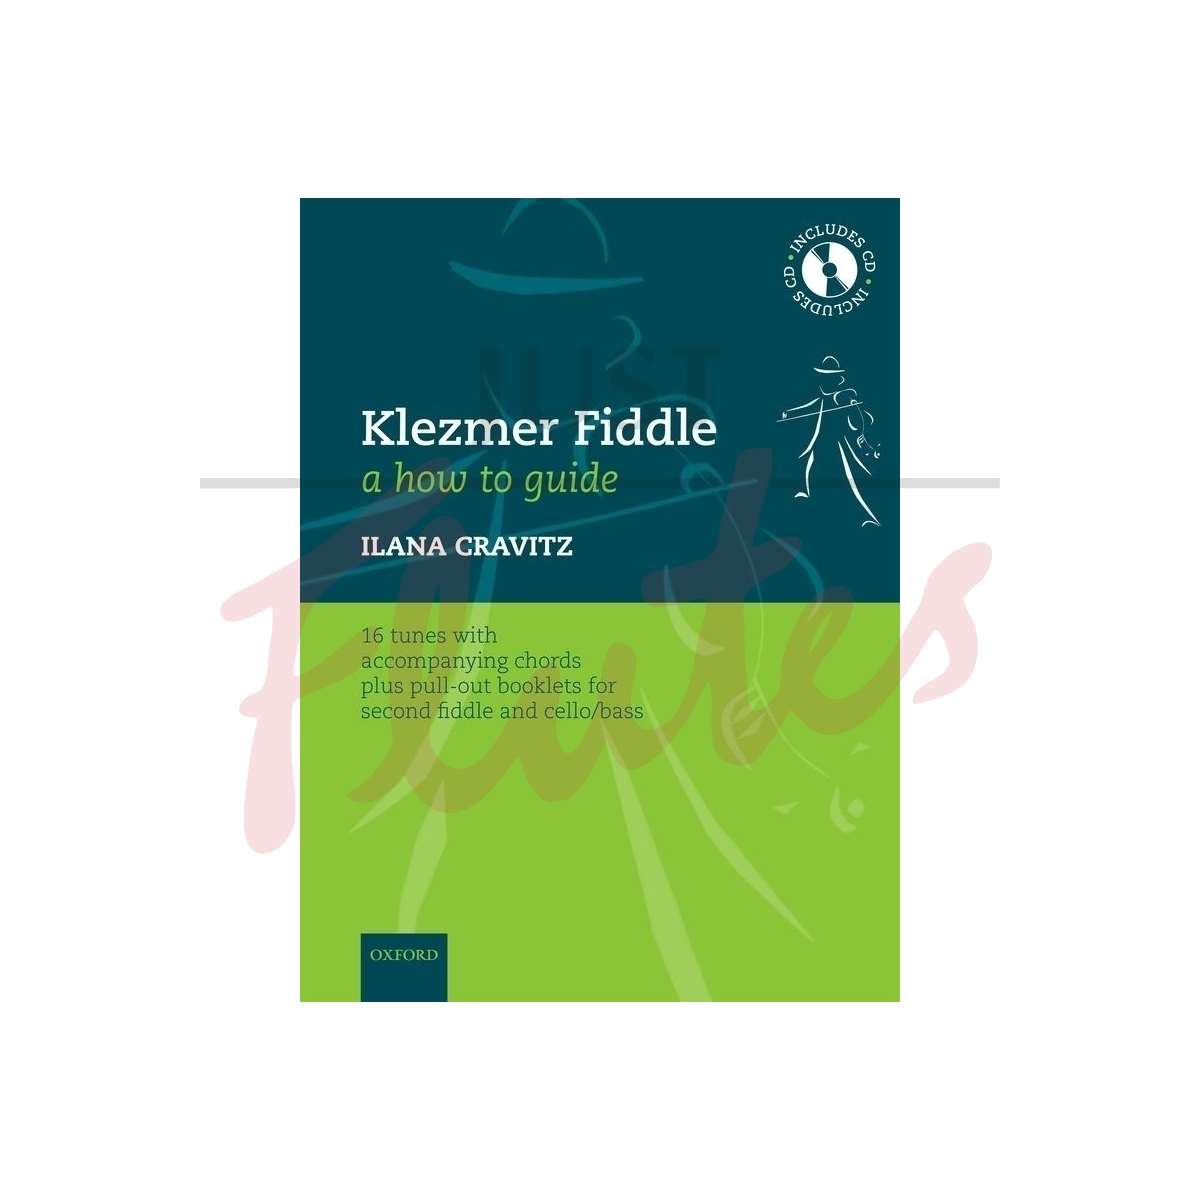 Klezmer Fiddle: A How To Guide